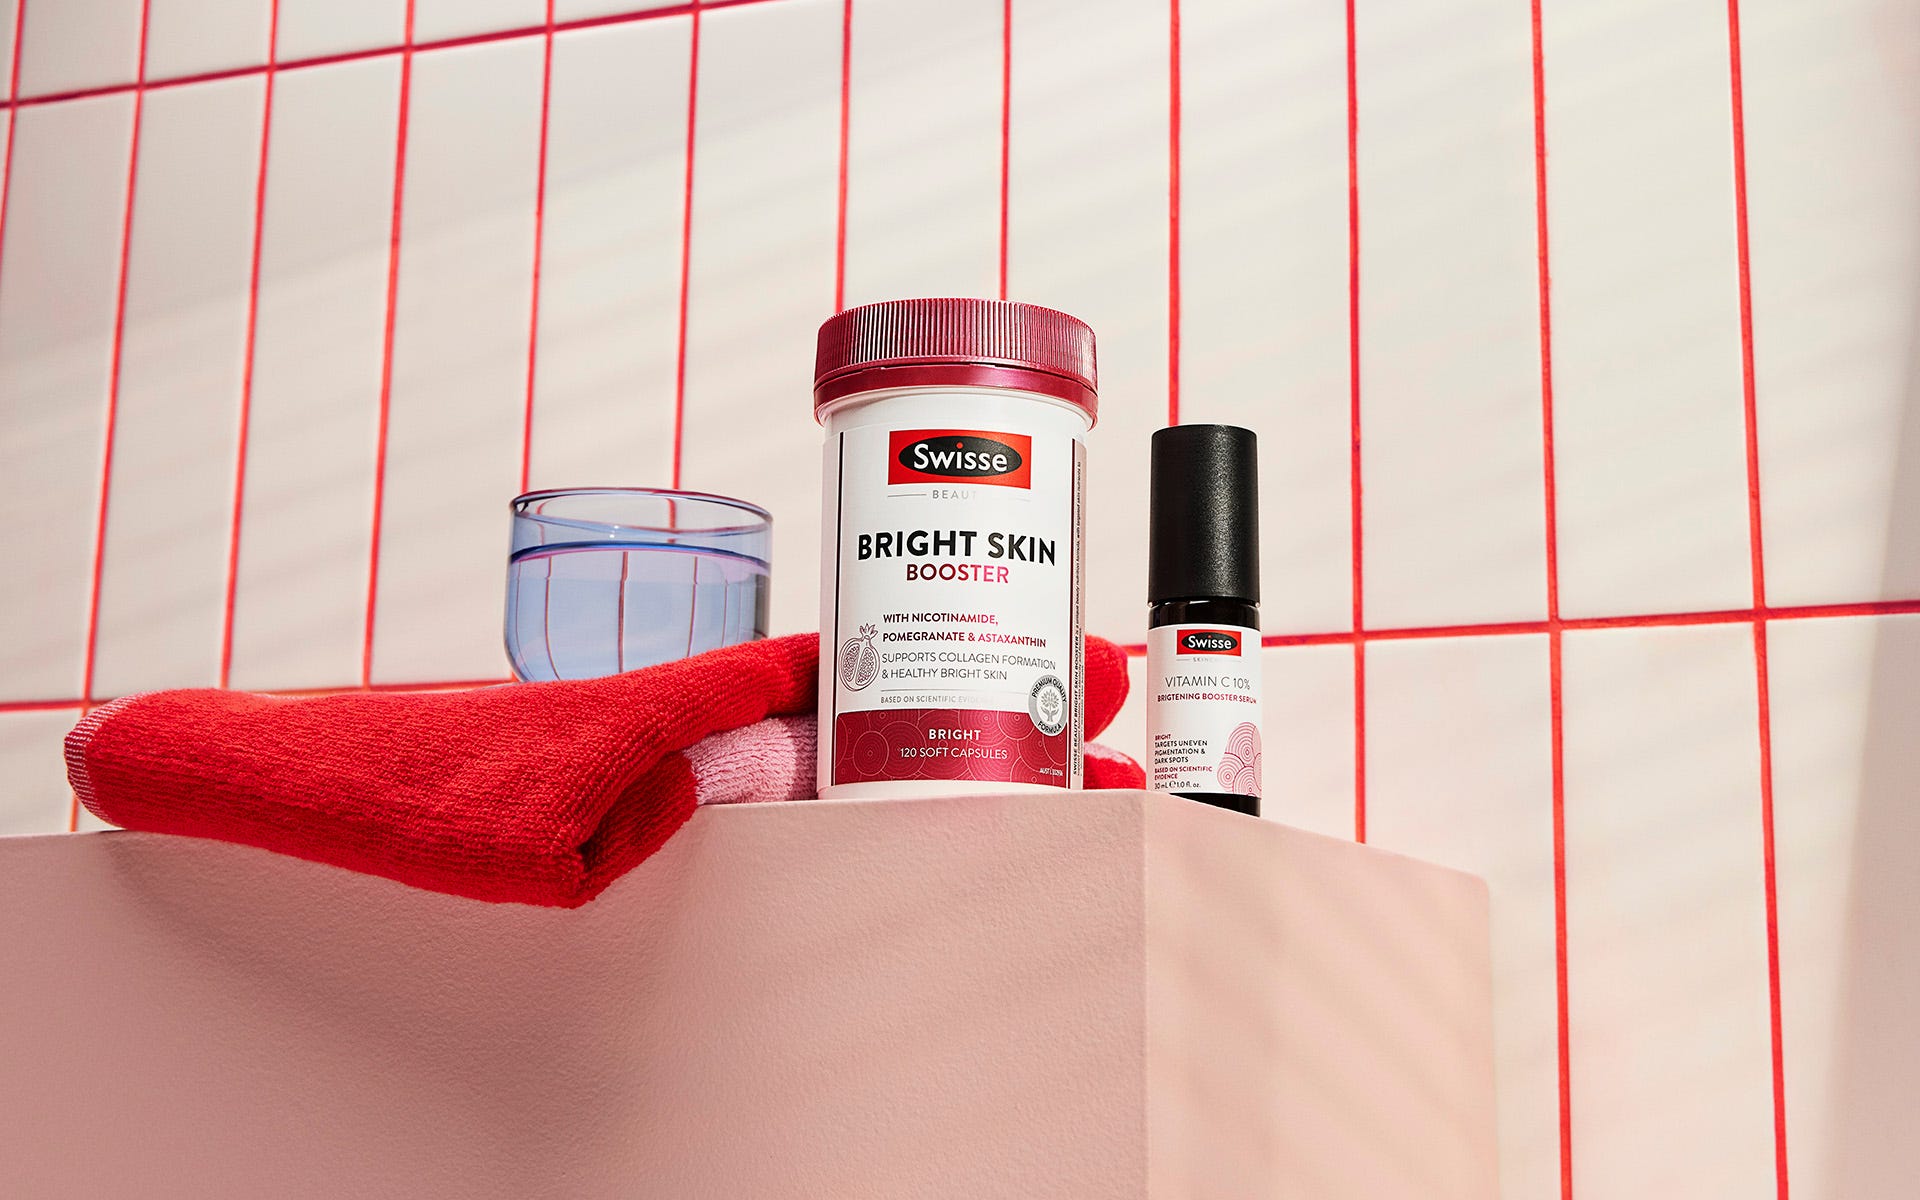 Two Swisse Beauty products from the Bright range next to a red towel and a glass of water.